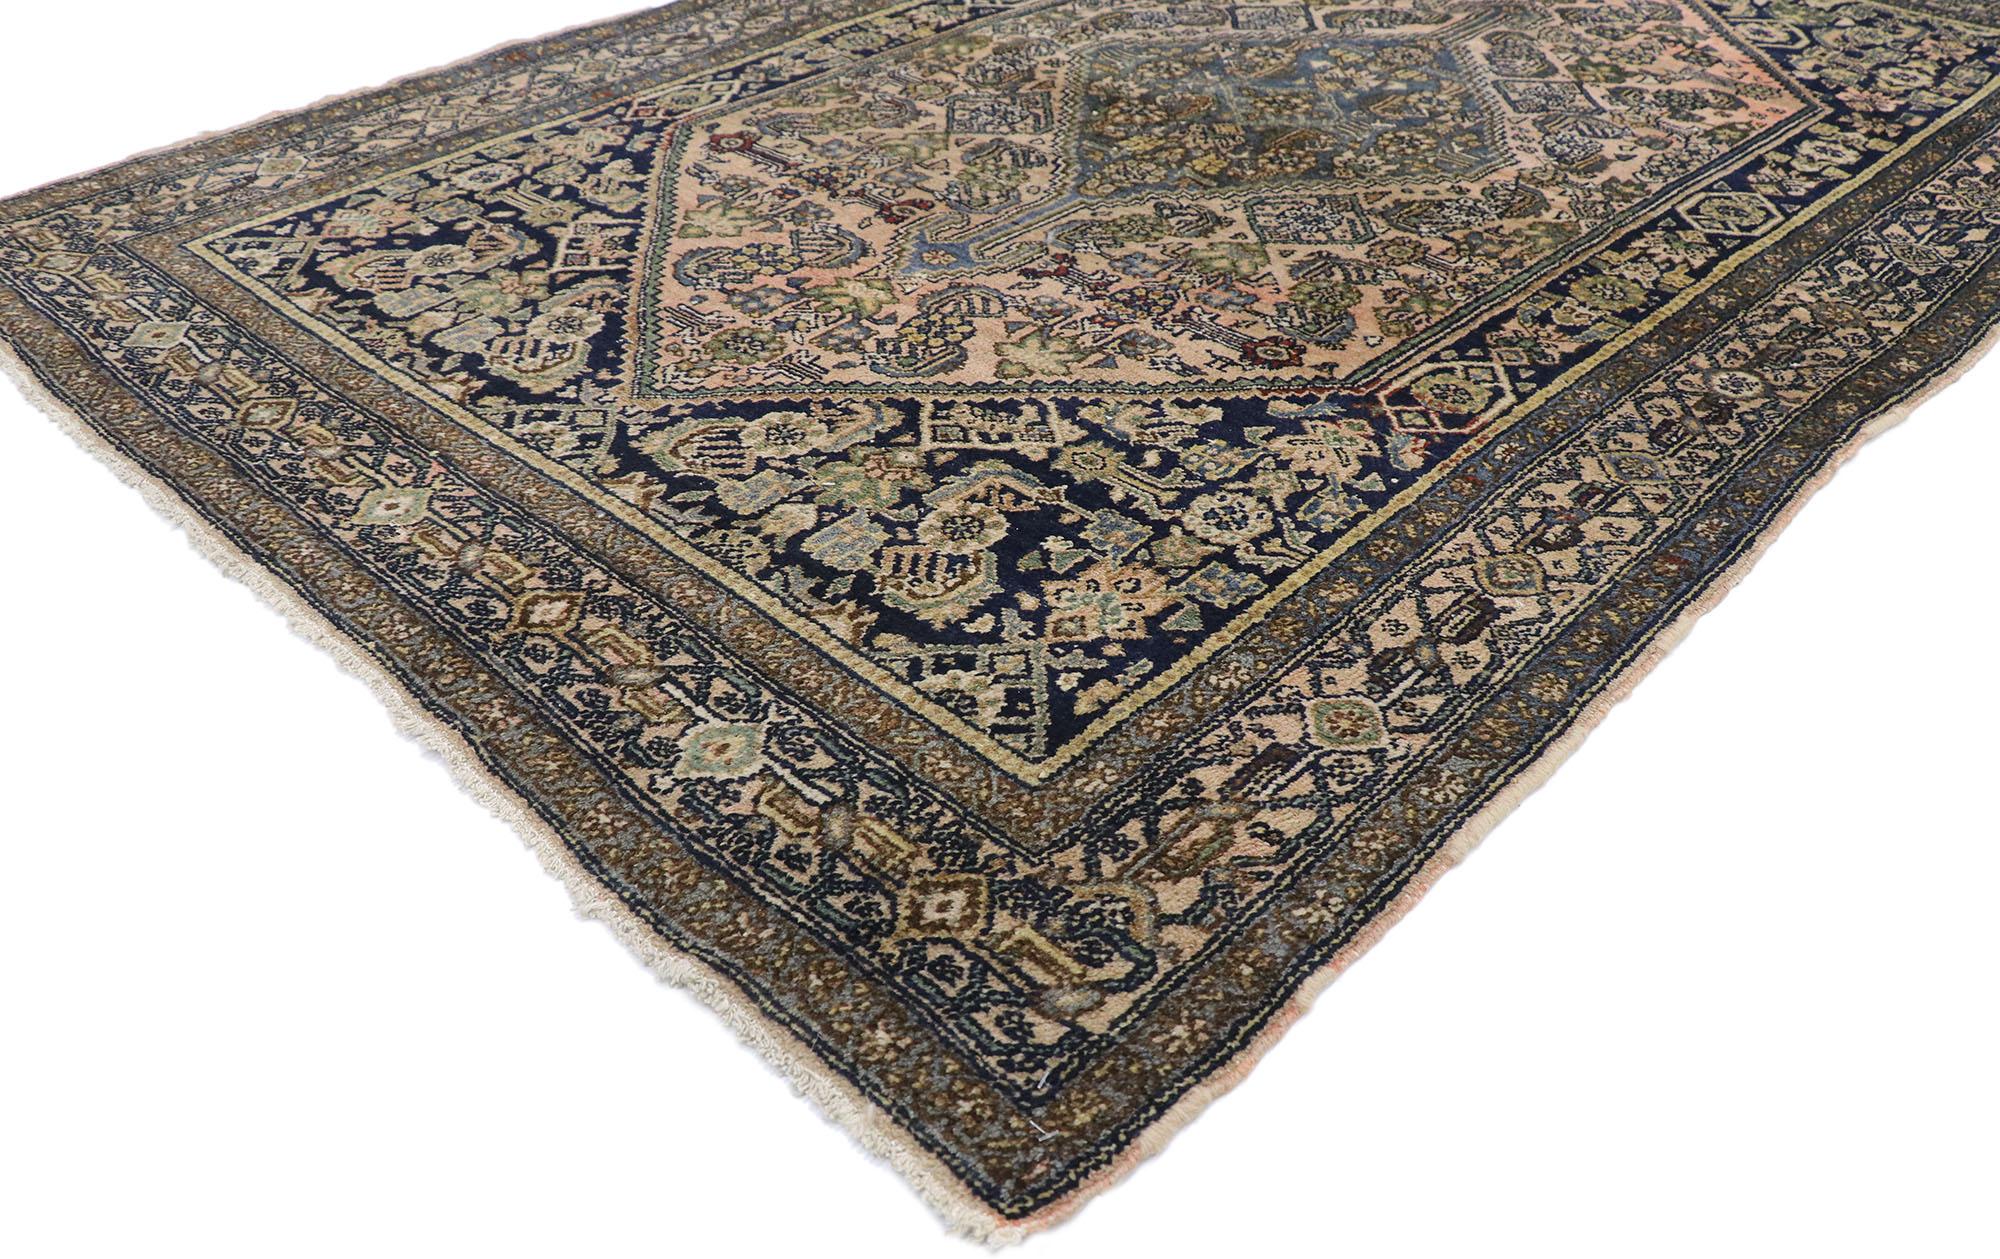 77710 Antique Persian Bibikabad Rug with Victorian Style 04'05 x 06'08. Effortless beauty, this hand knotted wool antique Persian Bibikabad rug is poised to impress. The abrashed light pink field features a large-scale diamond lozenge decorated with